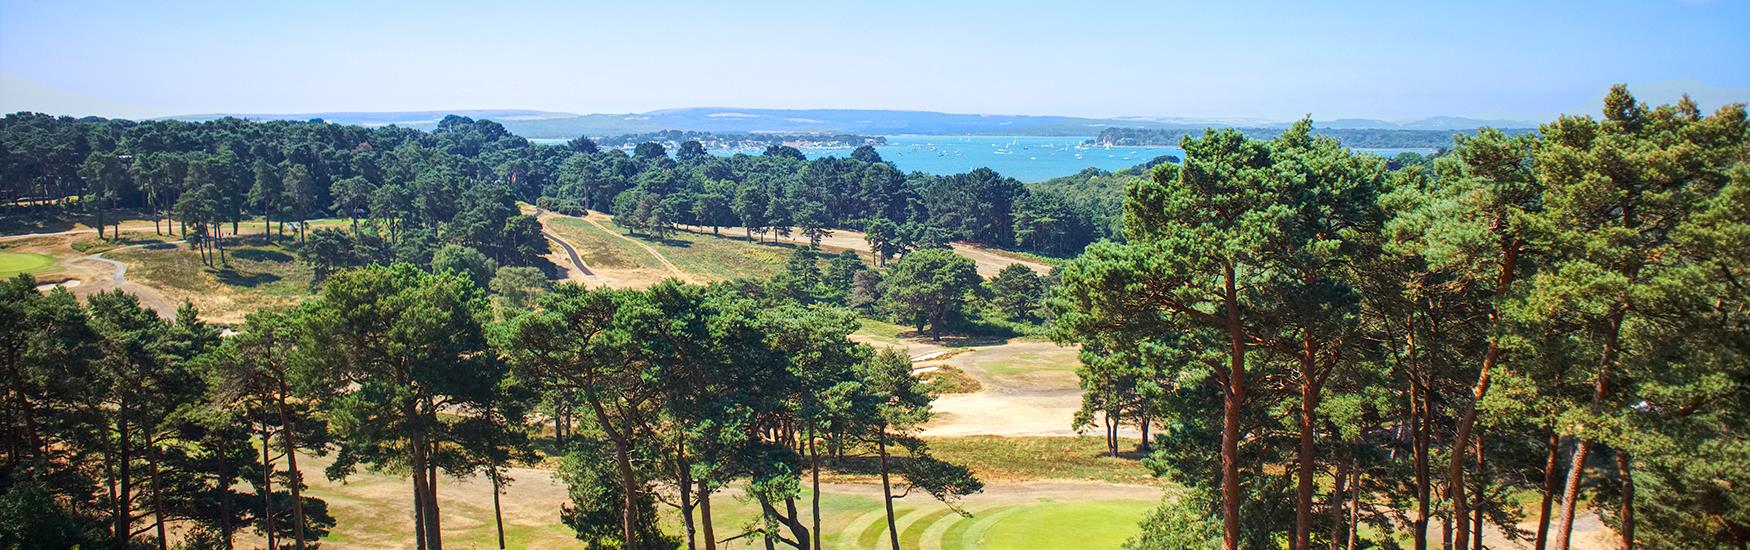 View of a green golf course with beautiful trees, grass and view of the sea with a blue sky